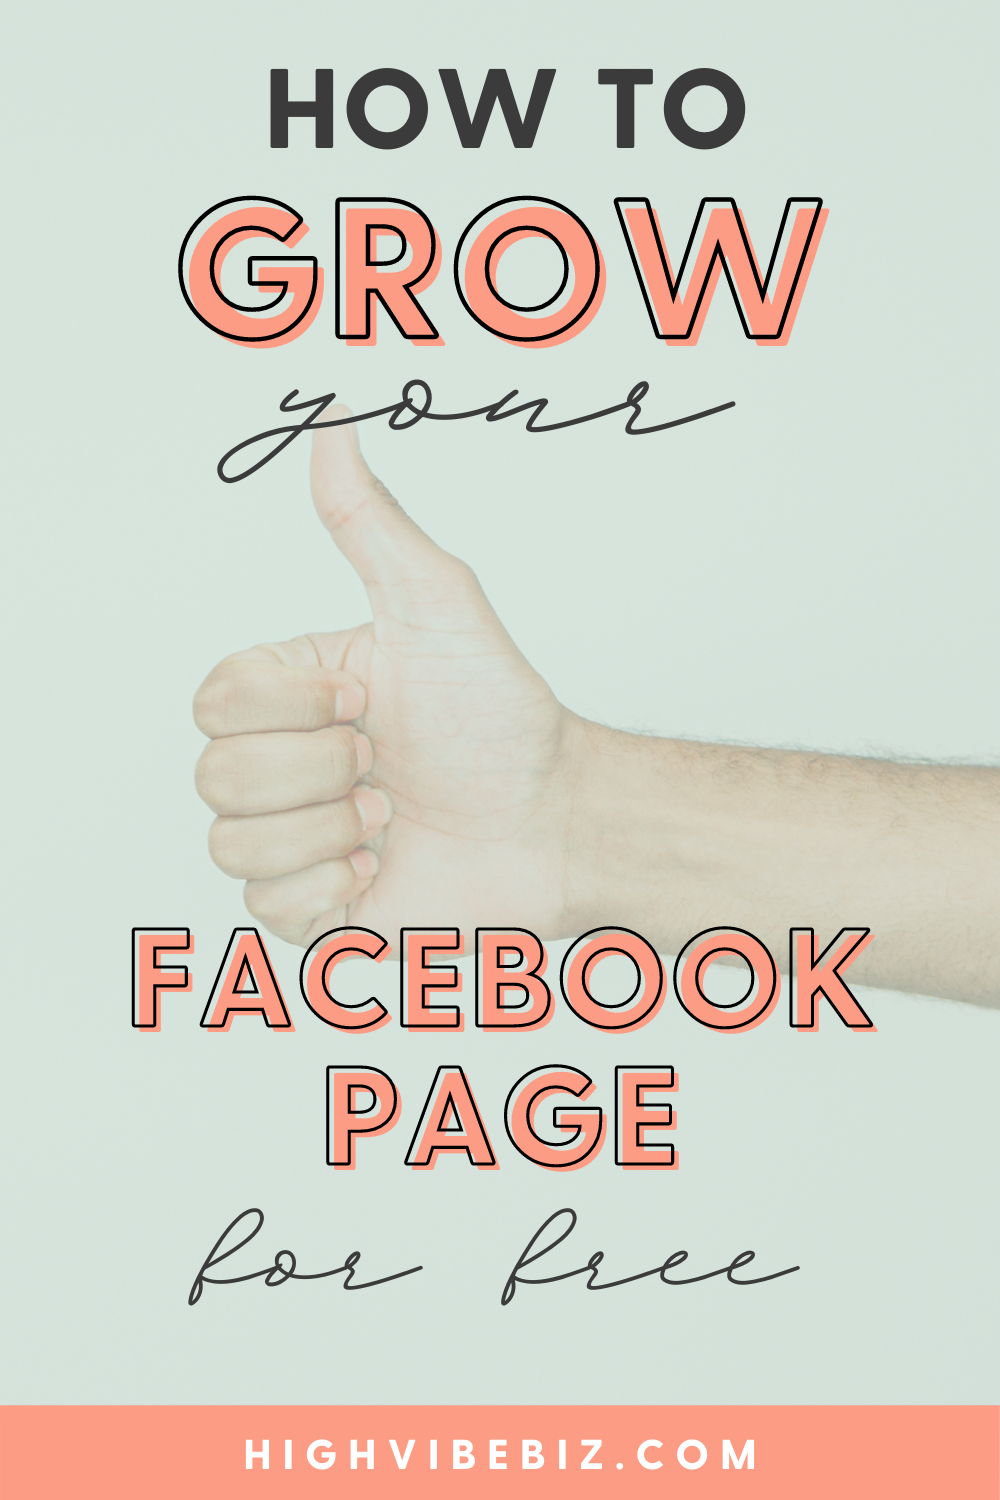  Ready to explode your Facebook Page Growth? Don’t worry this social media hack is free and you’re not buying bots! Engaged people only. 